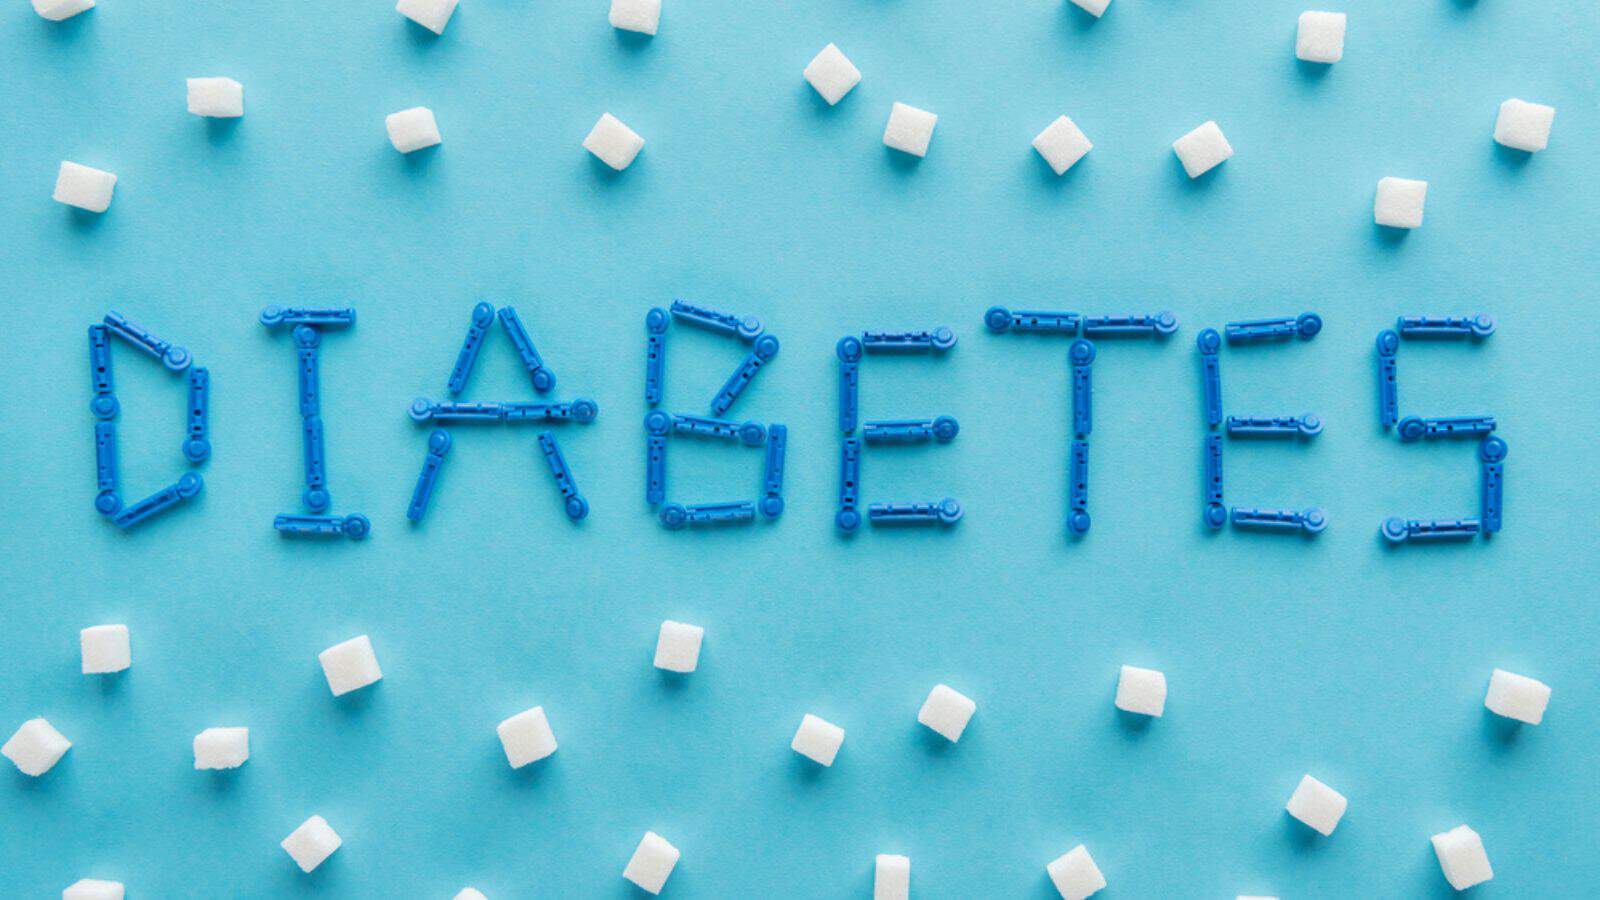 "Diabetes" word made of disposable needles with sugar cubes